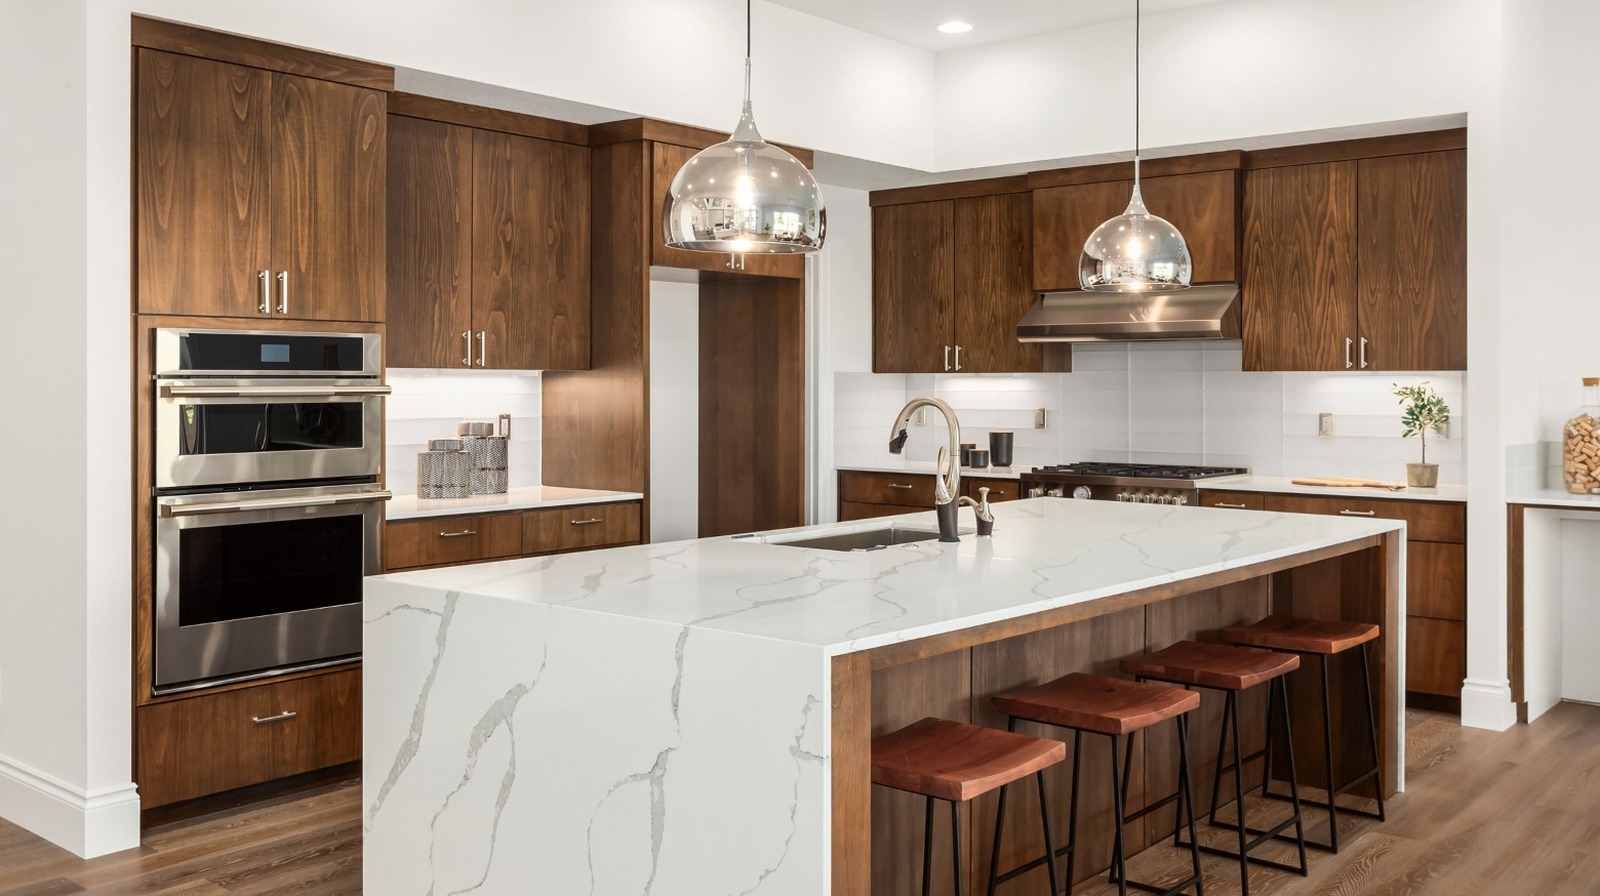 https://www.housedigest.com/img/gallery/the-only-kitchen-cabinet-makers-you-should-consider/l-intro-1665507796.jpg